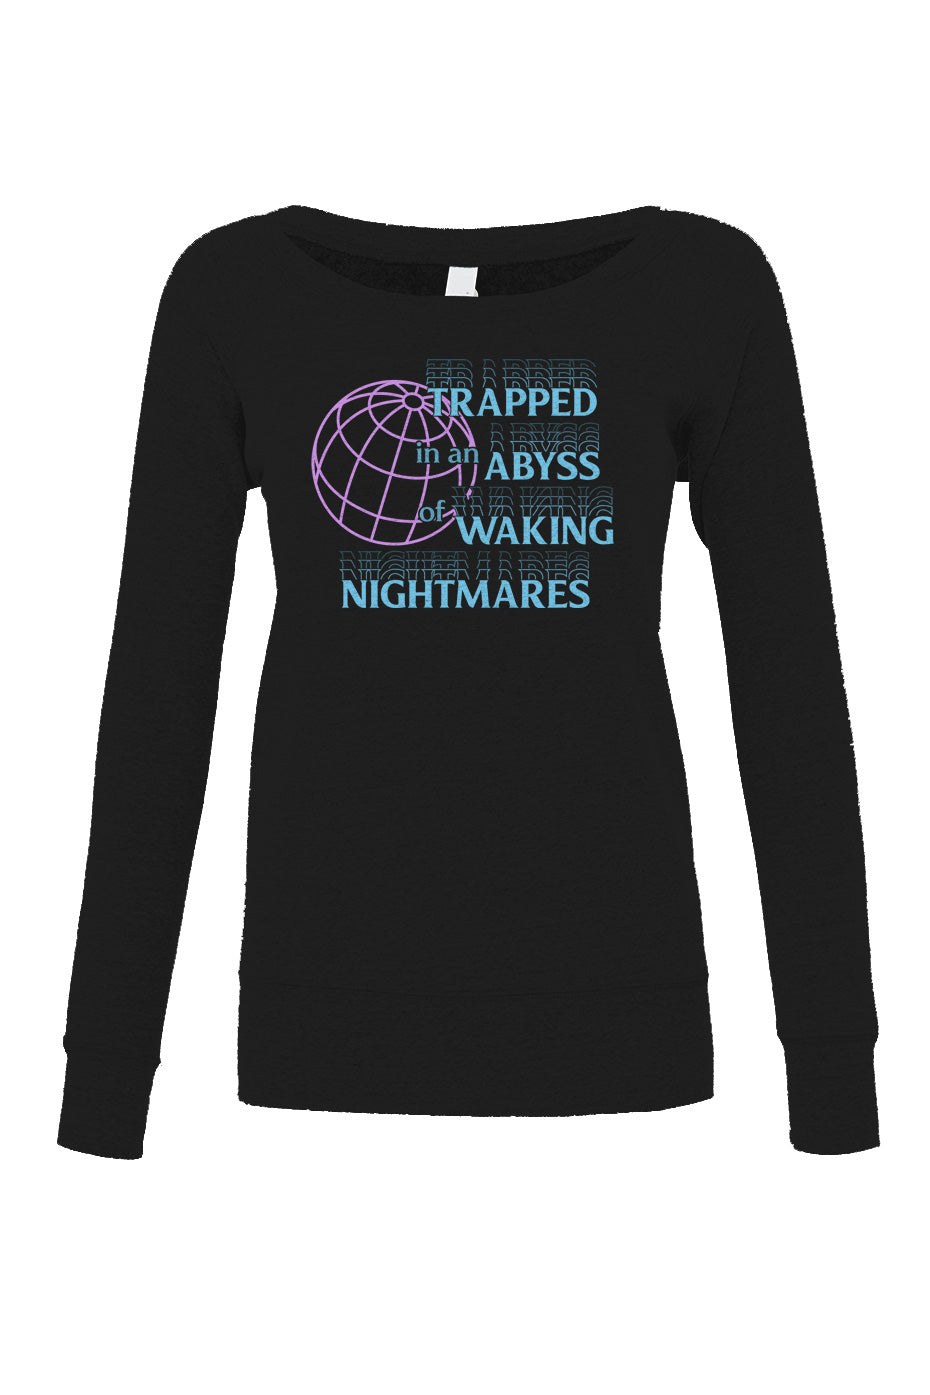 Women's Trapped in an Abyss of Waking Nightmares Scoop Neck Fleece